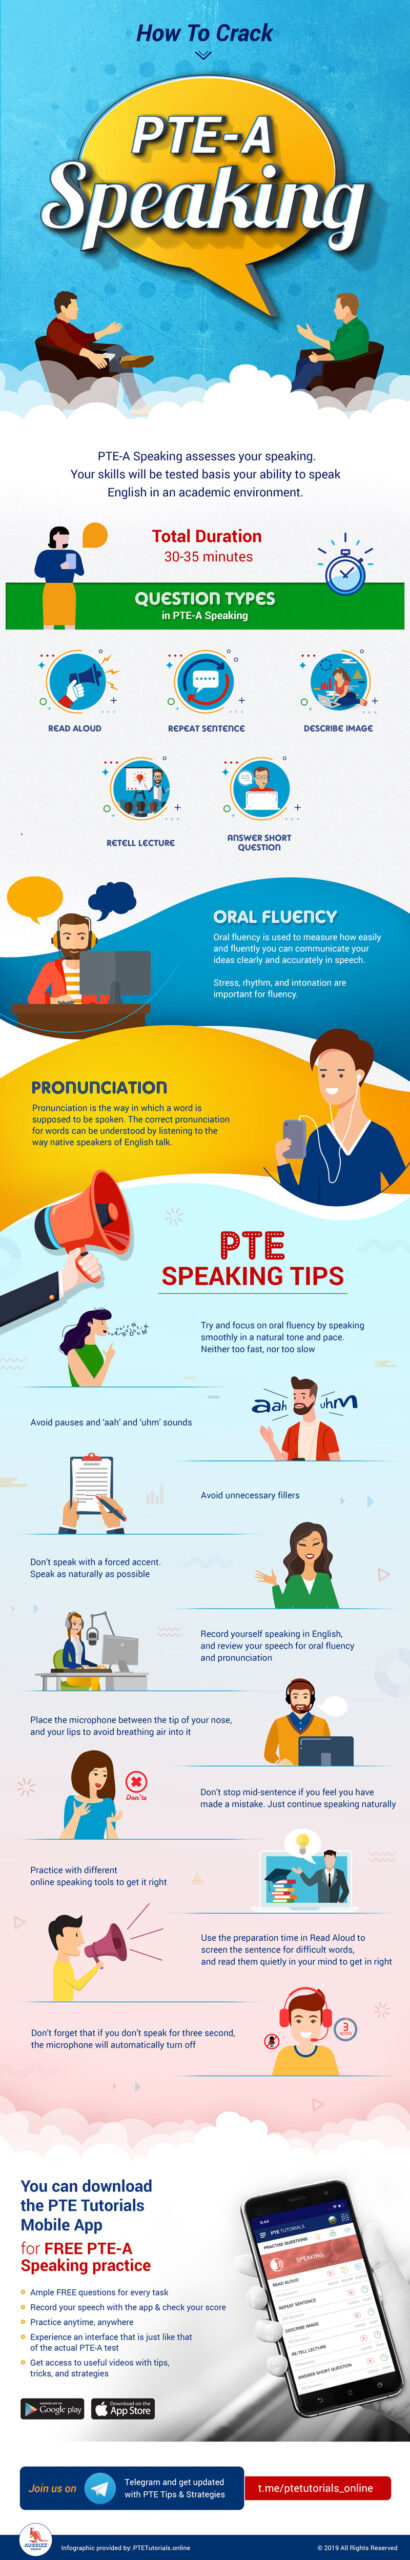 how-to-crack-pte-a-speaking